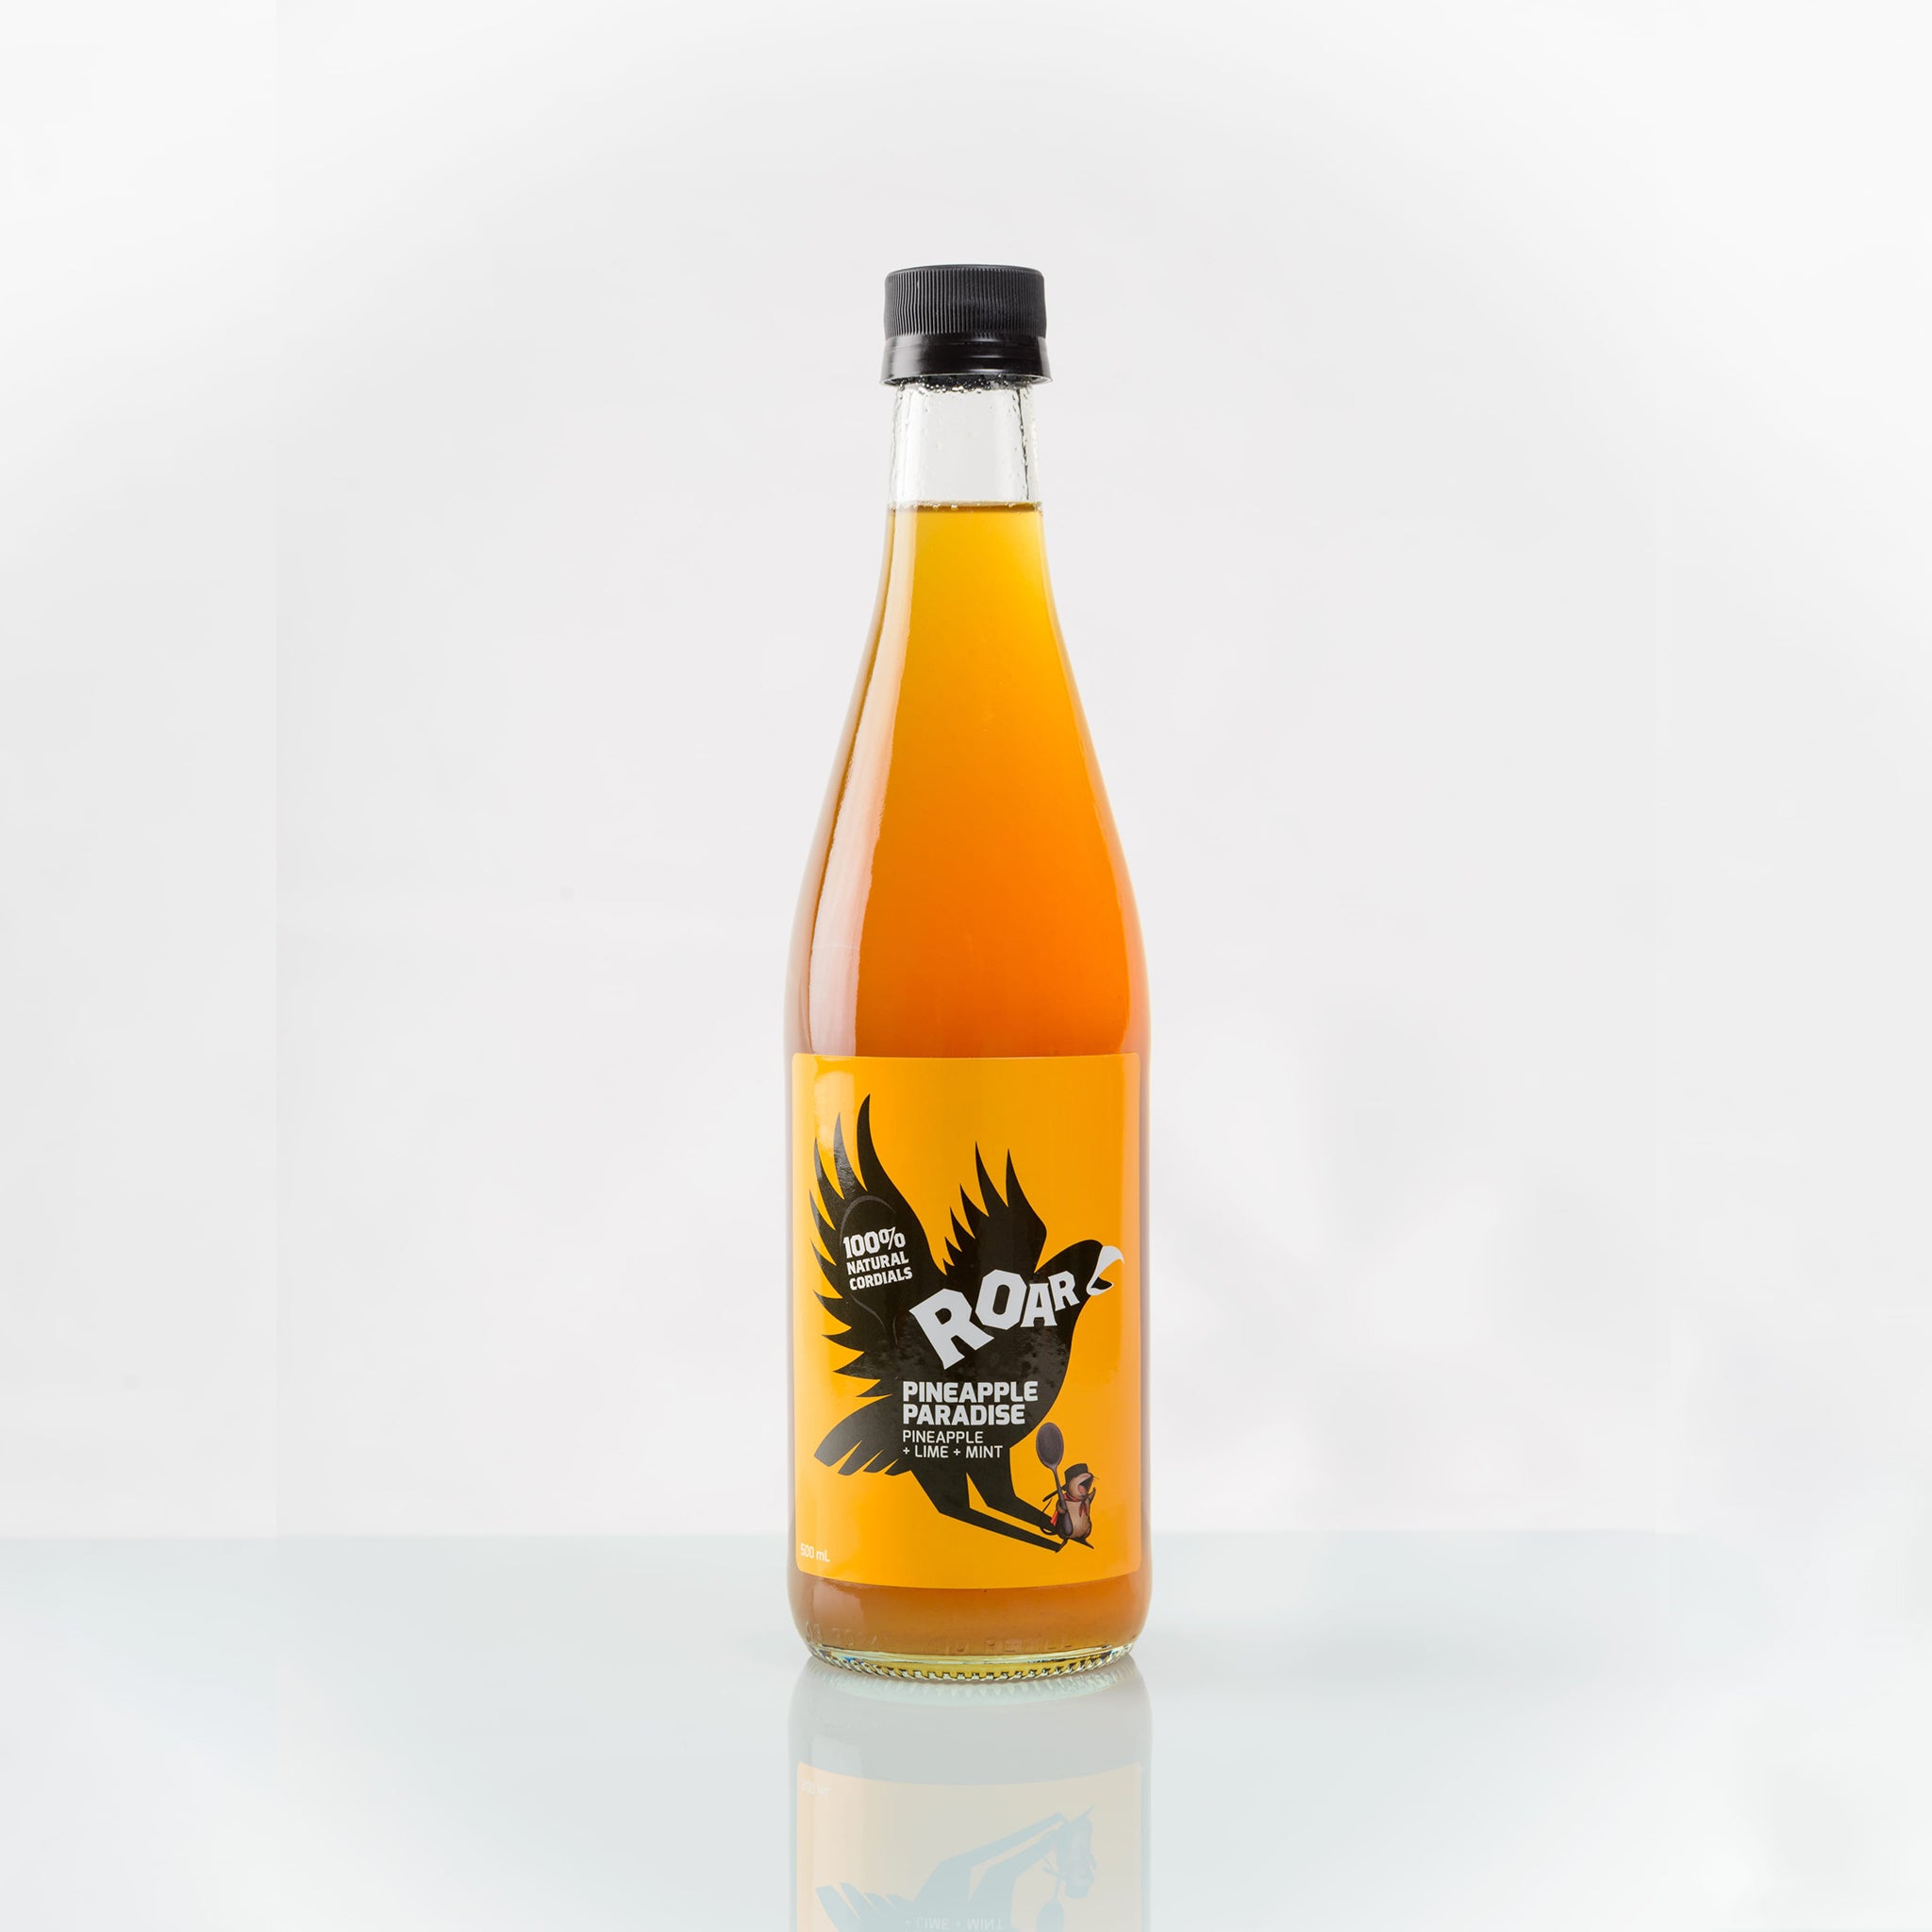 Pineapple cordial 100% natural made by Roar Living, front bottle label.